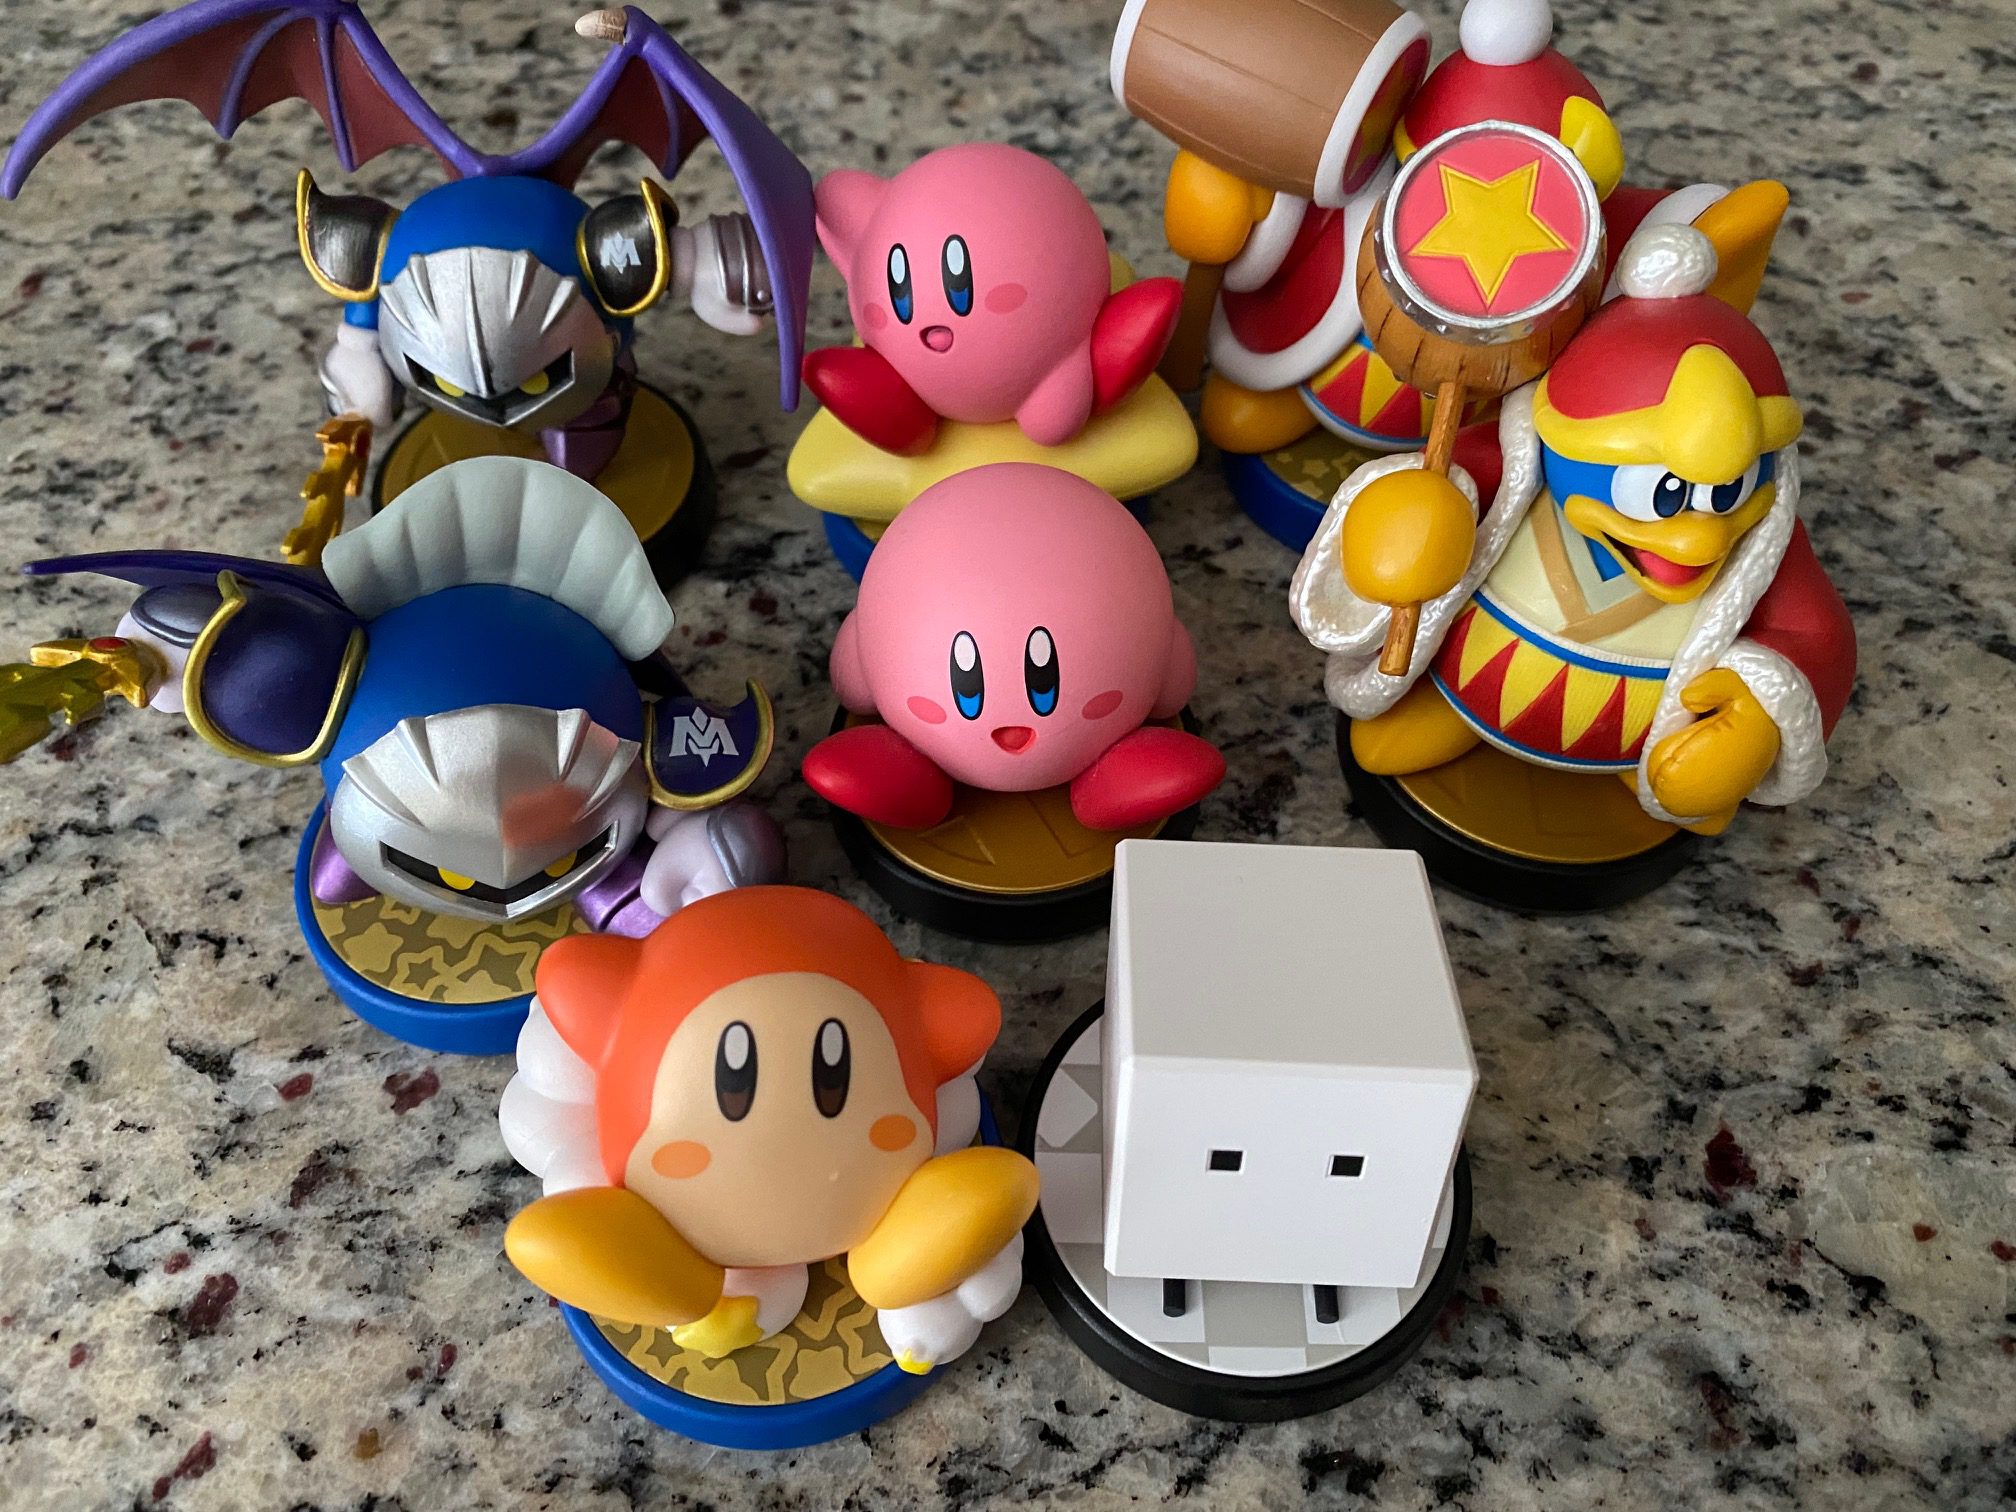 Here's how Kirby and the Forgotten Land amiibo functionality works